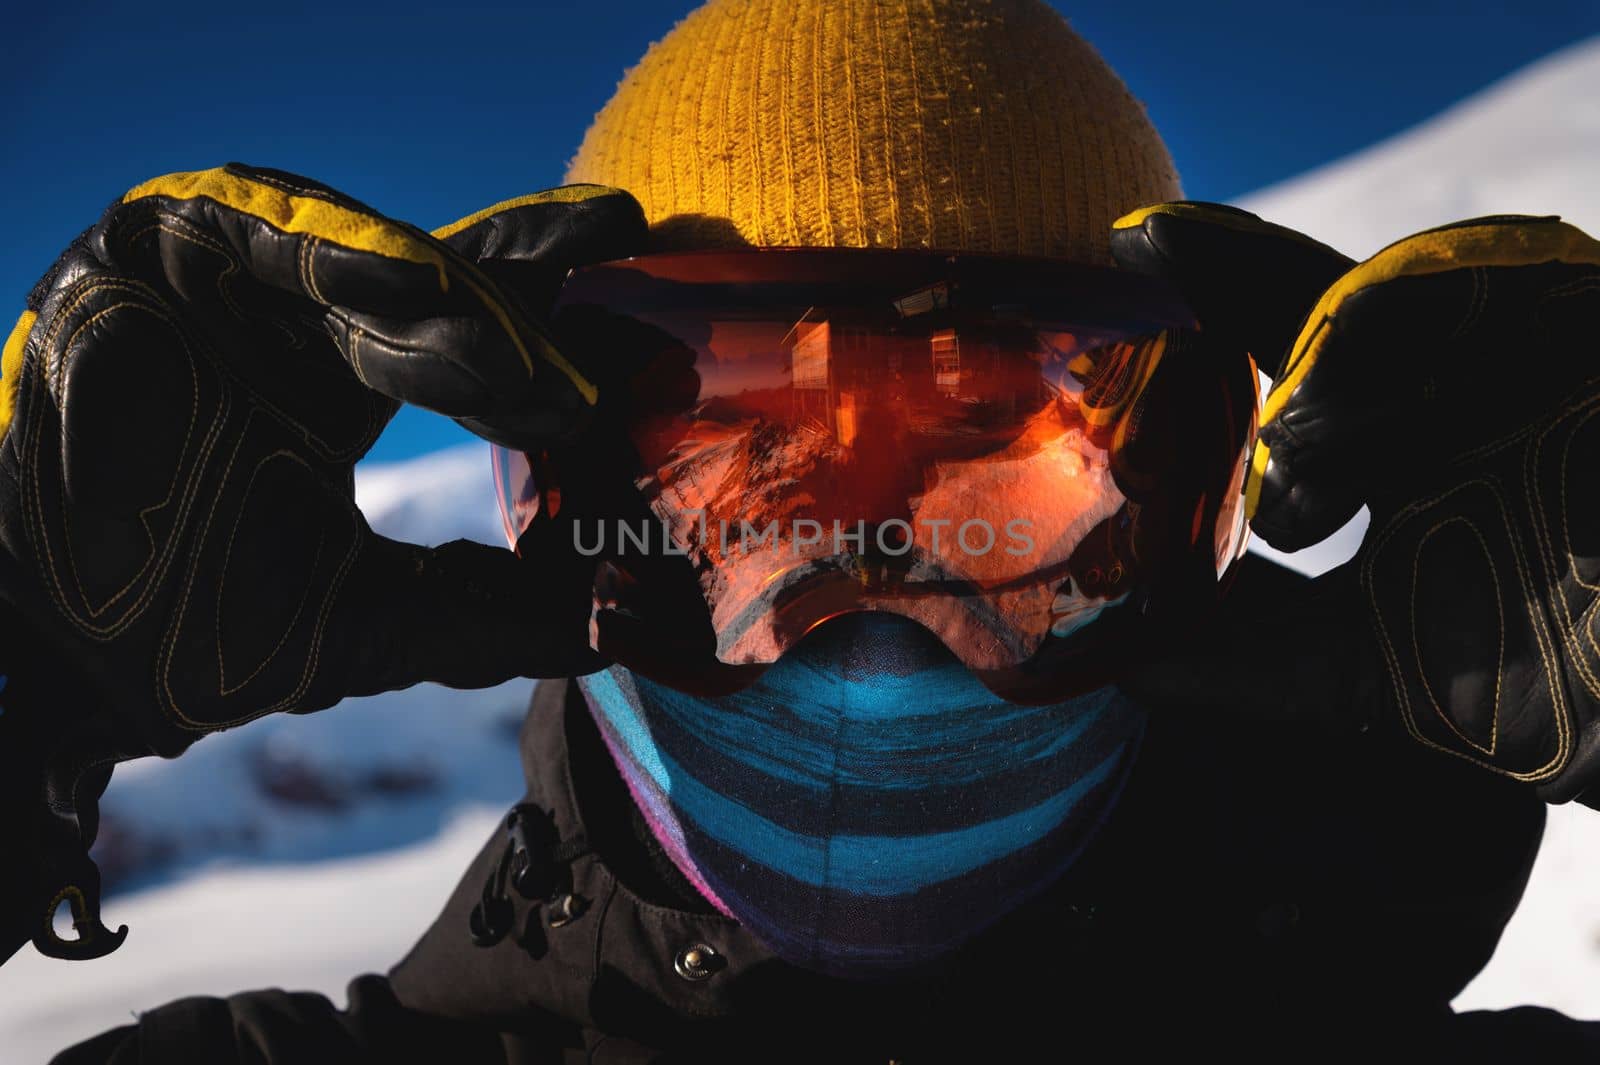 Skier in ski goggles with reflection of snow-capped mountains in them. Portrait of a man in a ski resort against the backdrop of mountains and blue sky.